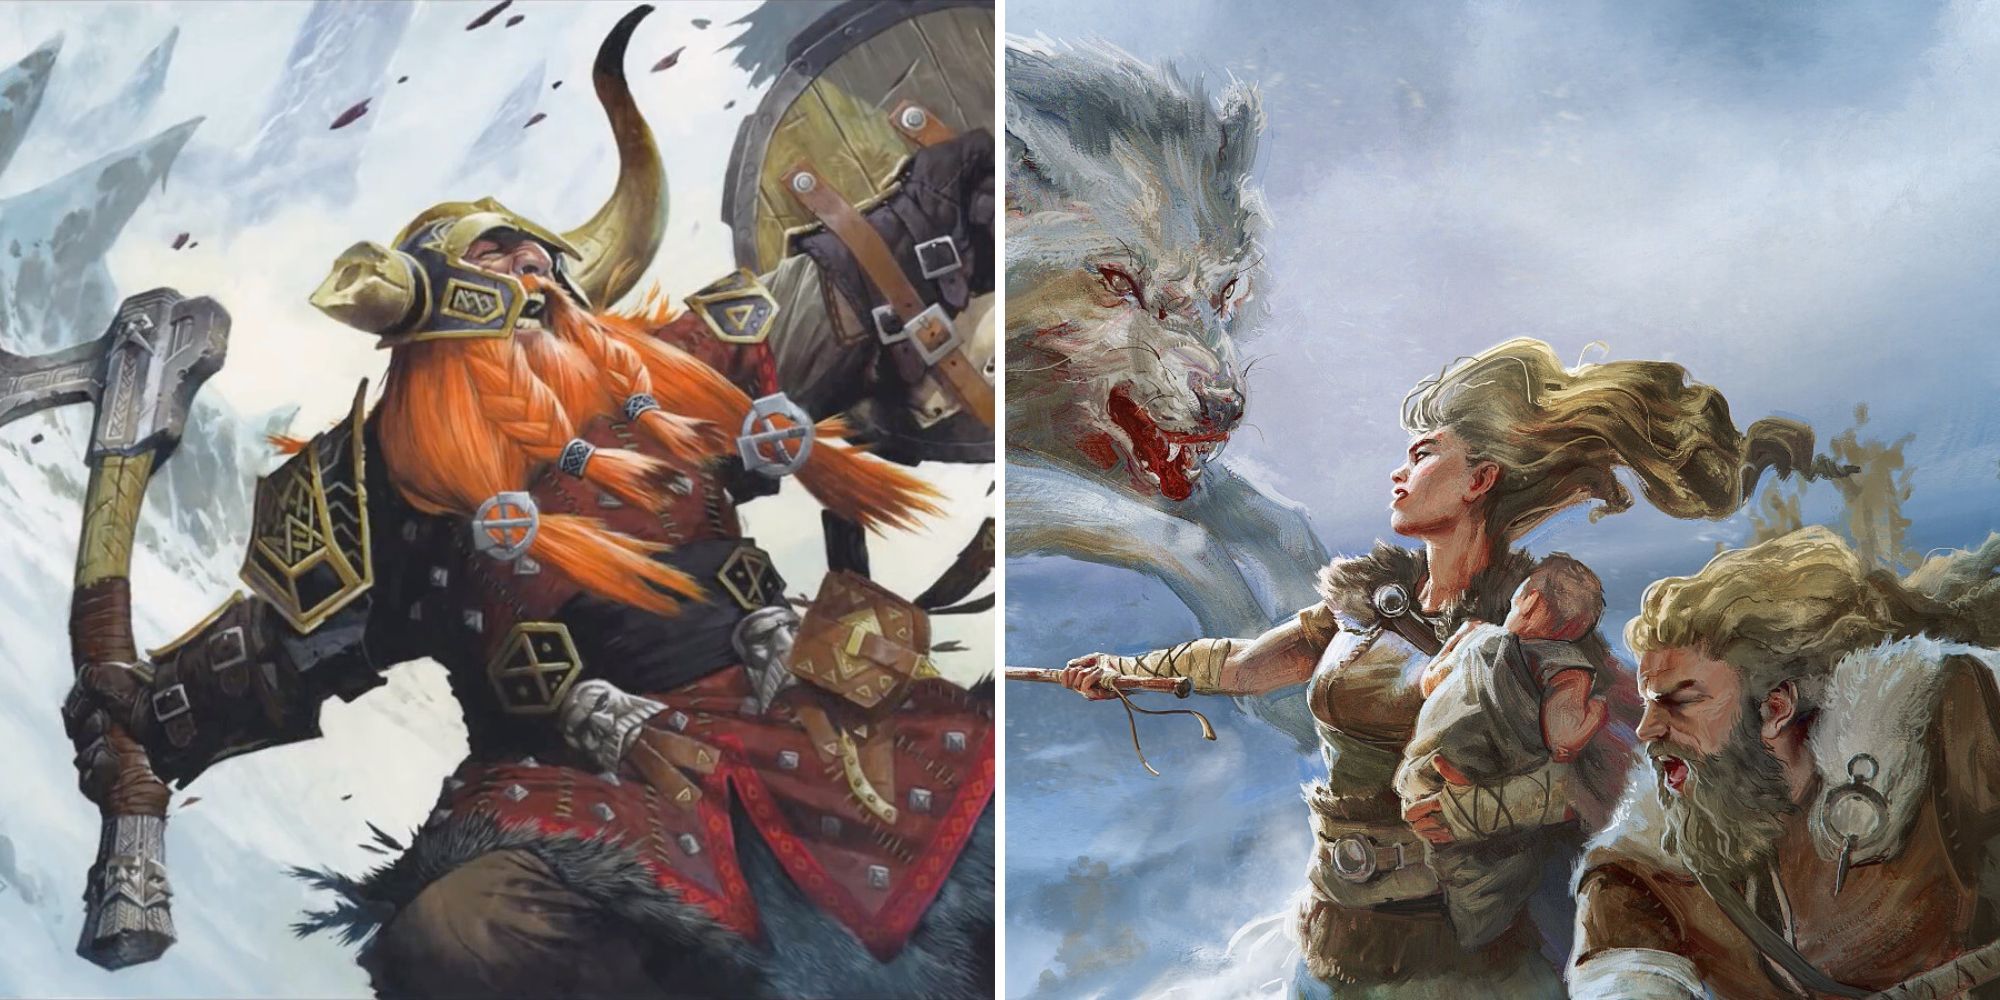 The Best Magic Items For Barbarian Characters In D&D